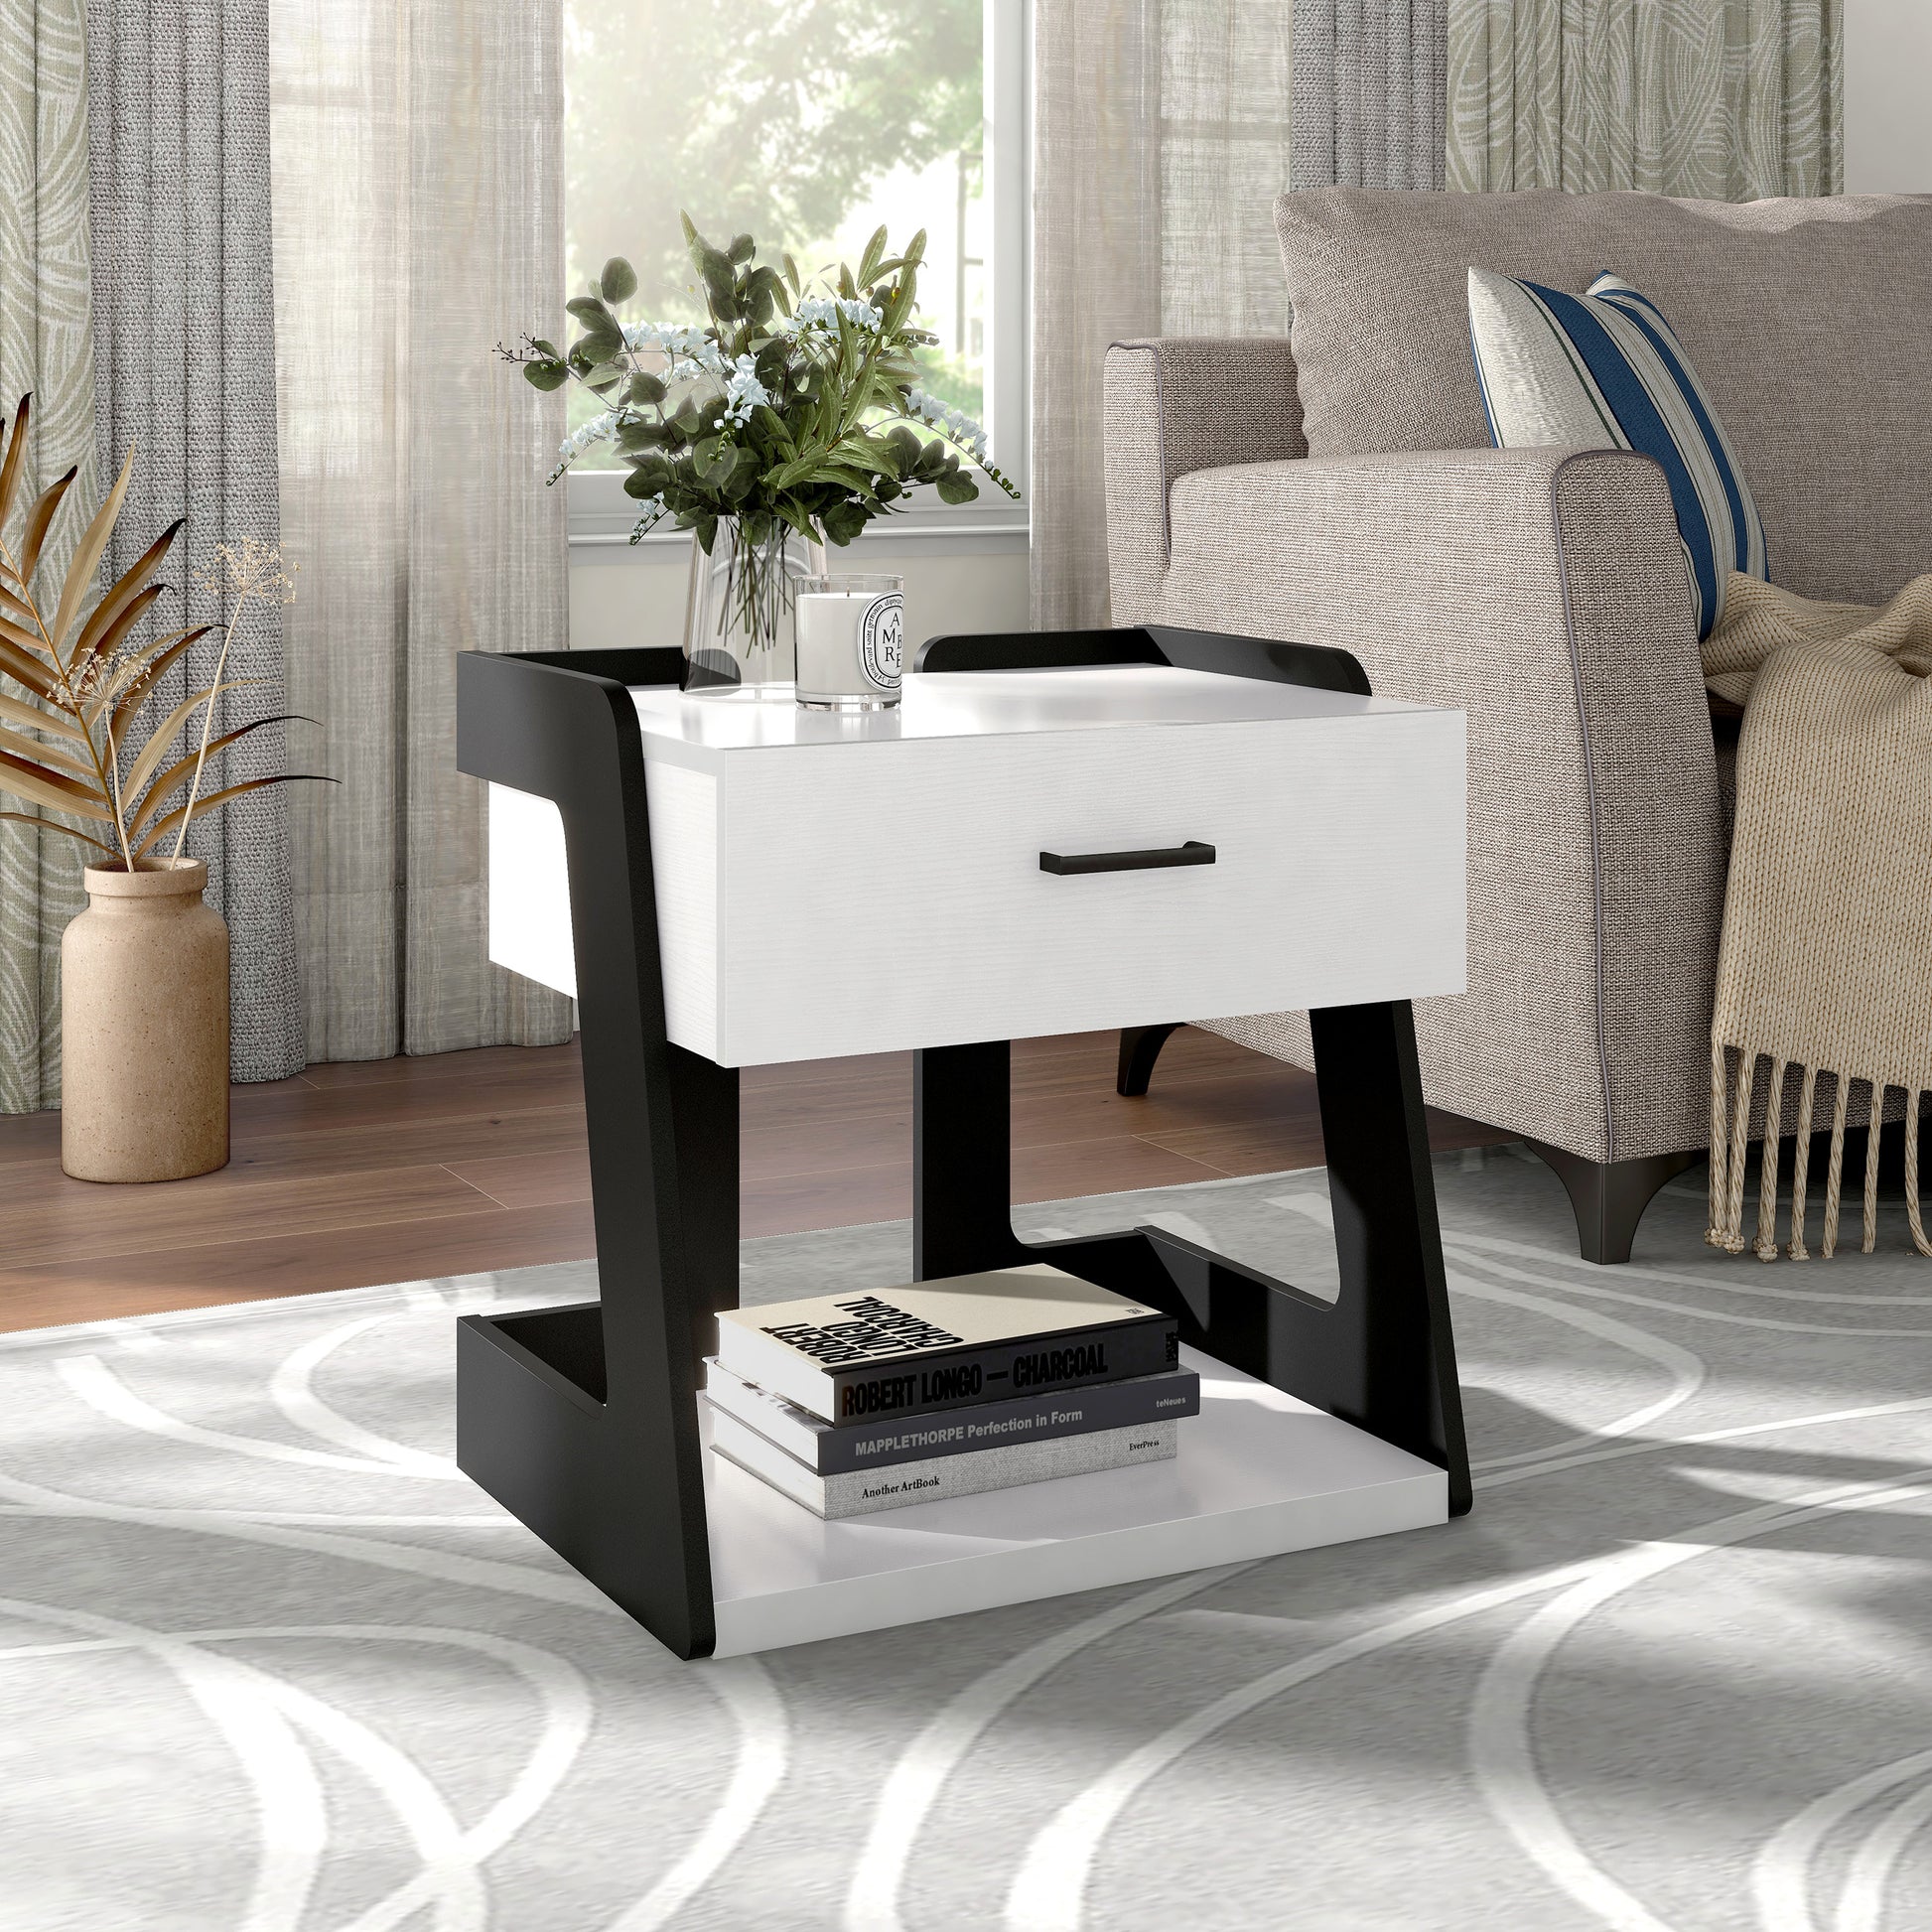 Right angled contemporary white and black one-drawer side table with a shelf in a living room with accessories